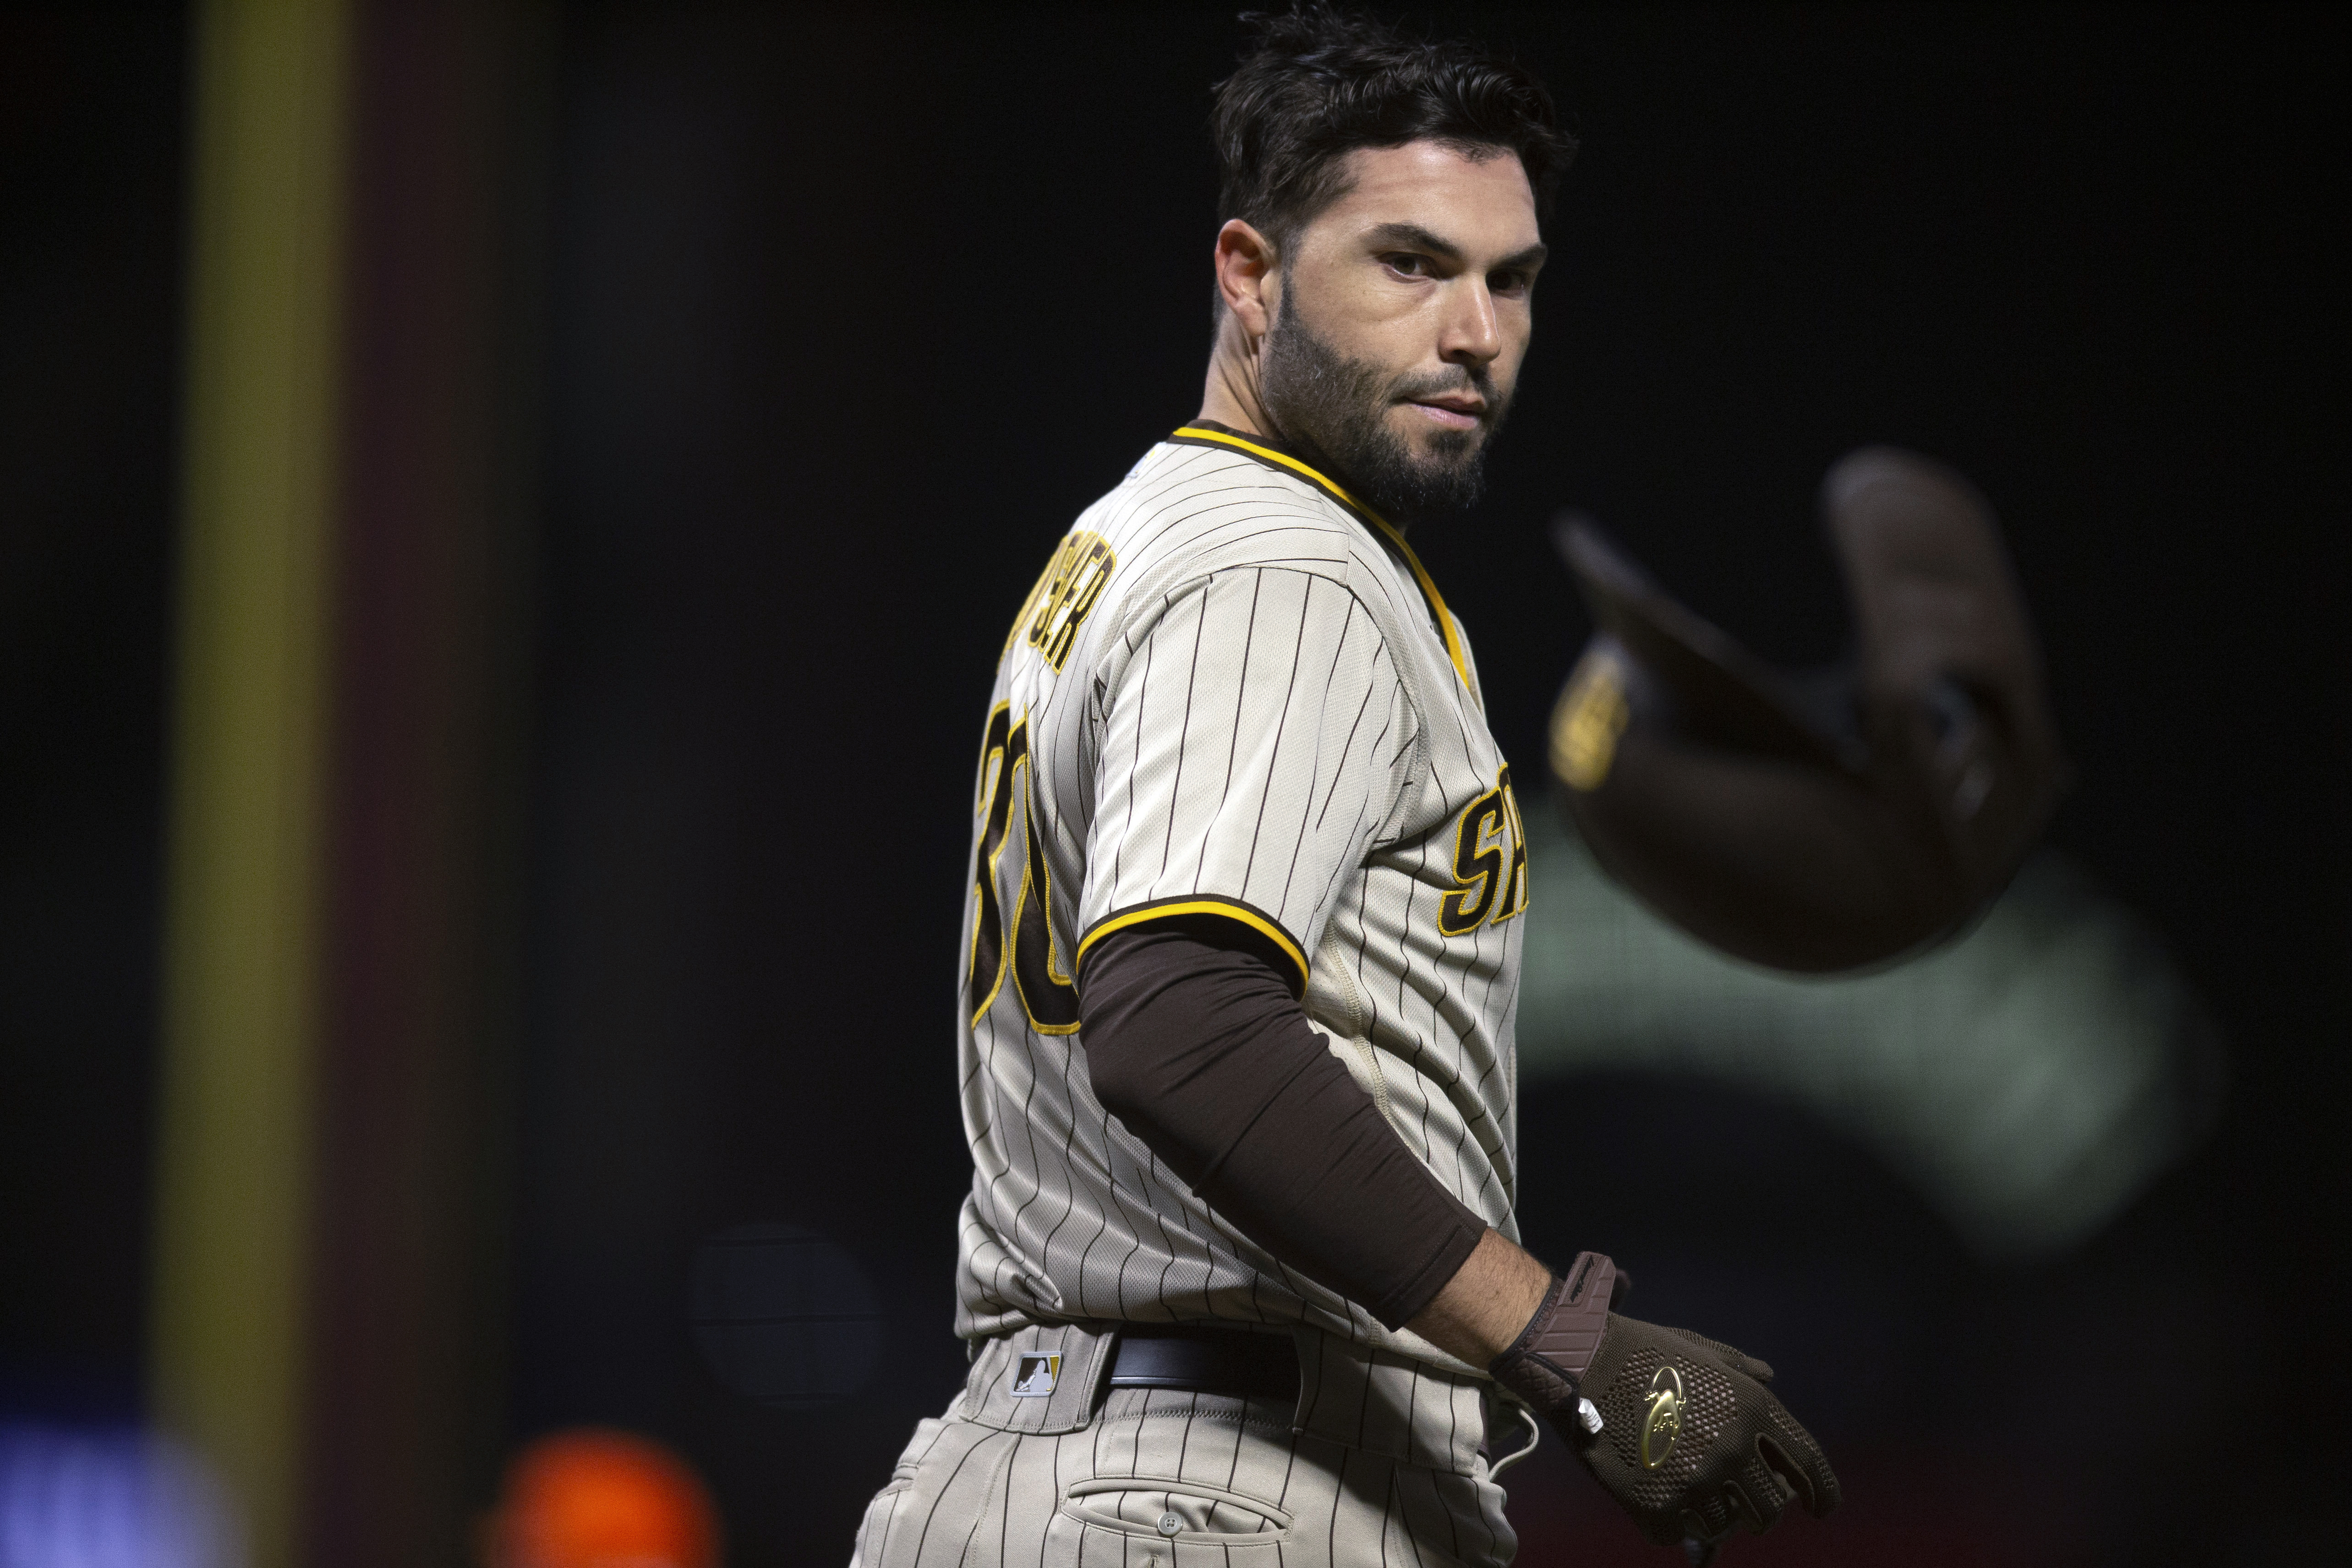 Eric Hosmer Trade Rumors: Mets' Deal with Padres for 1B 'Not Going